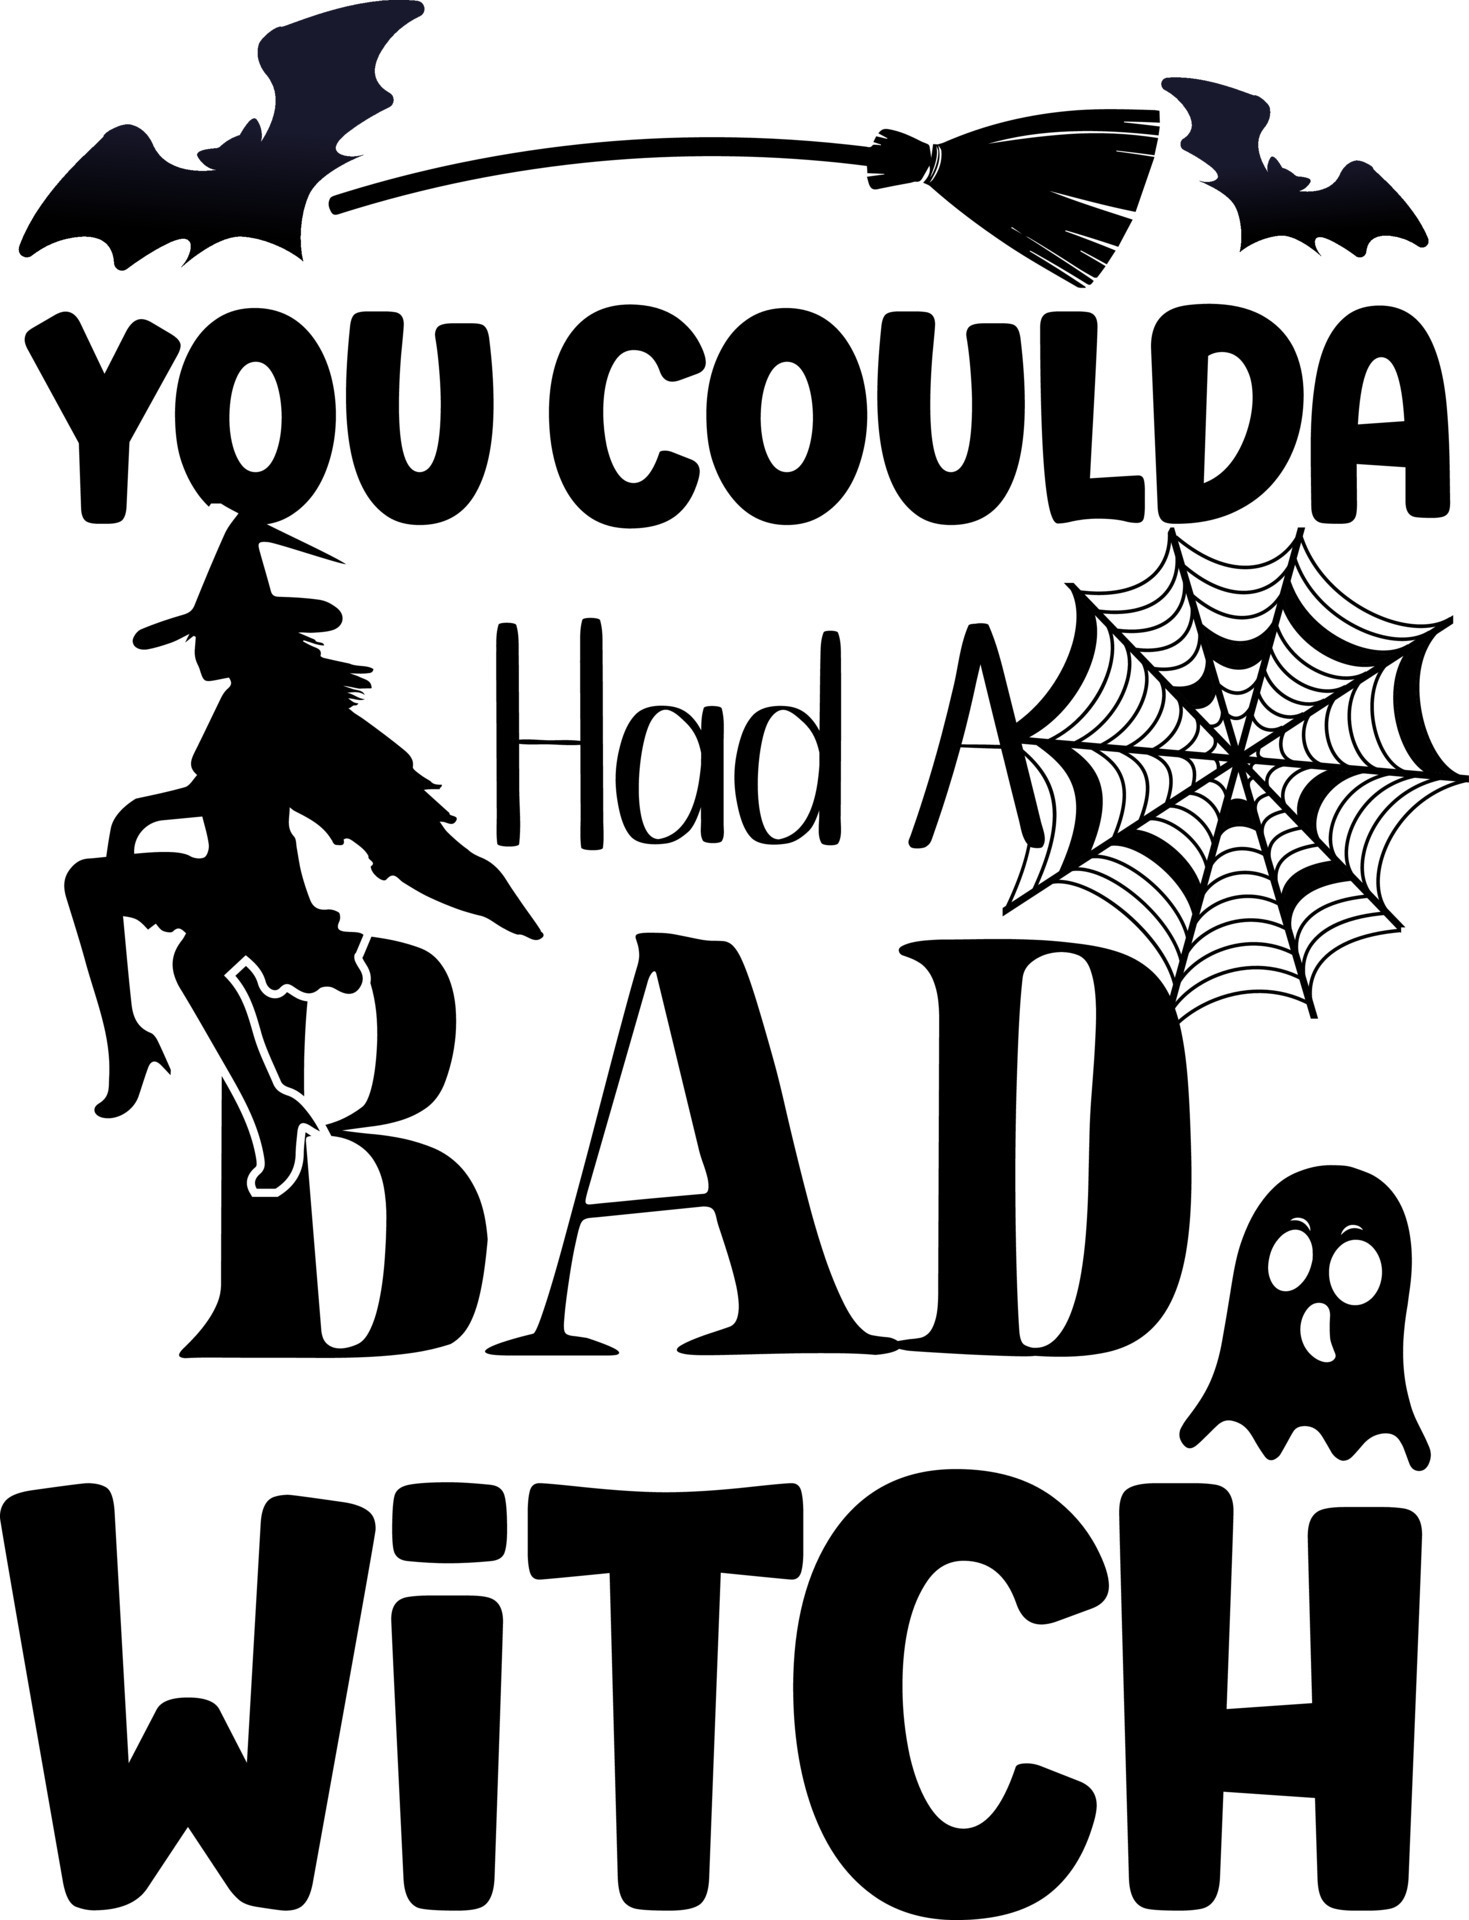 halloween-you-coulda-had-a-bad-witch-9830341-vector-art-at-vecteezy